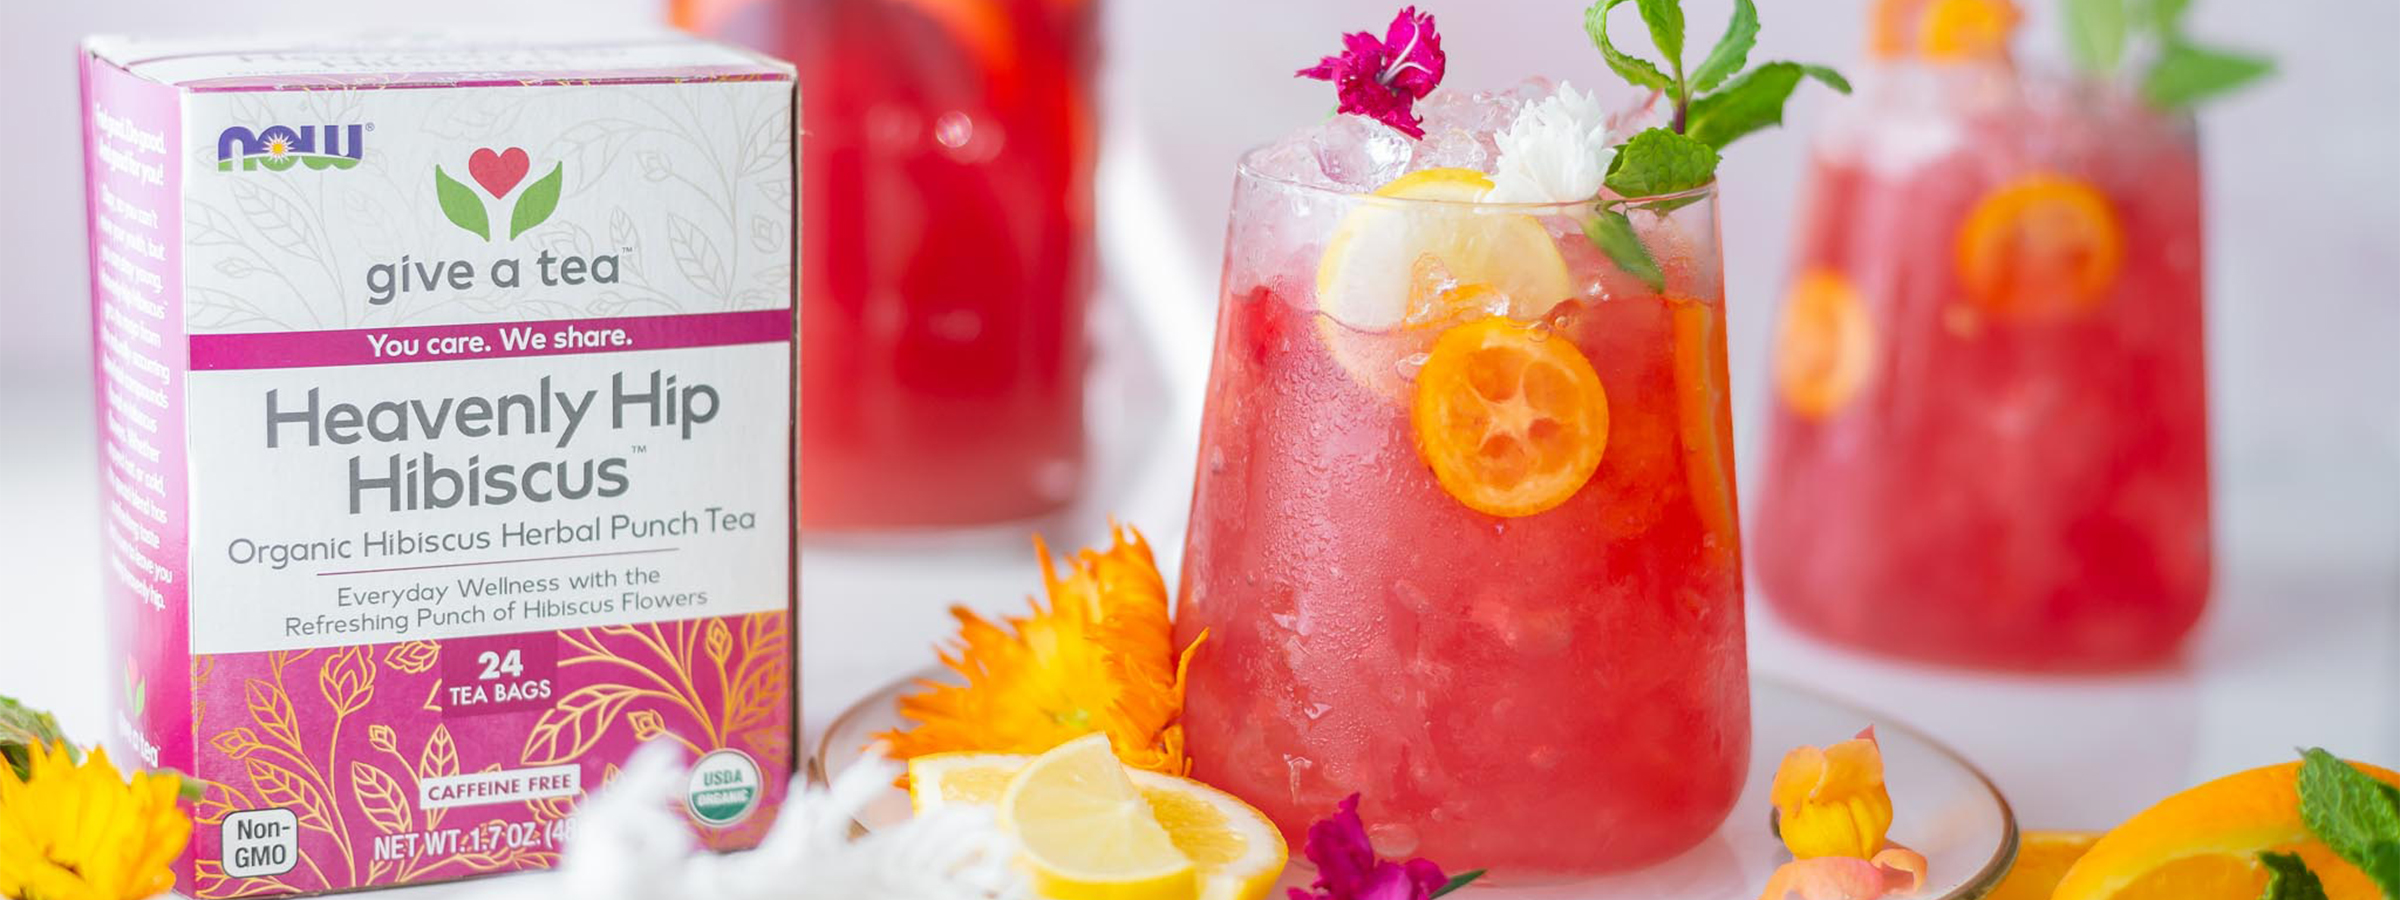 glass filled with a hibiscus tropical fruit punch dink surrounded by NOW Heavenly Hibiscus Tea and various fruits and flower garnishes